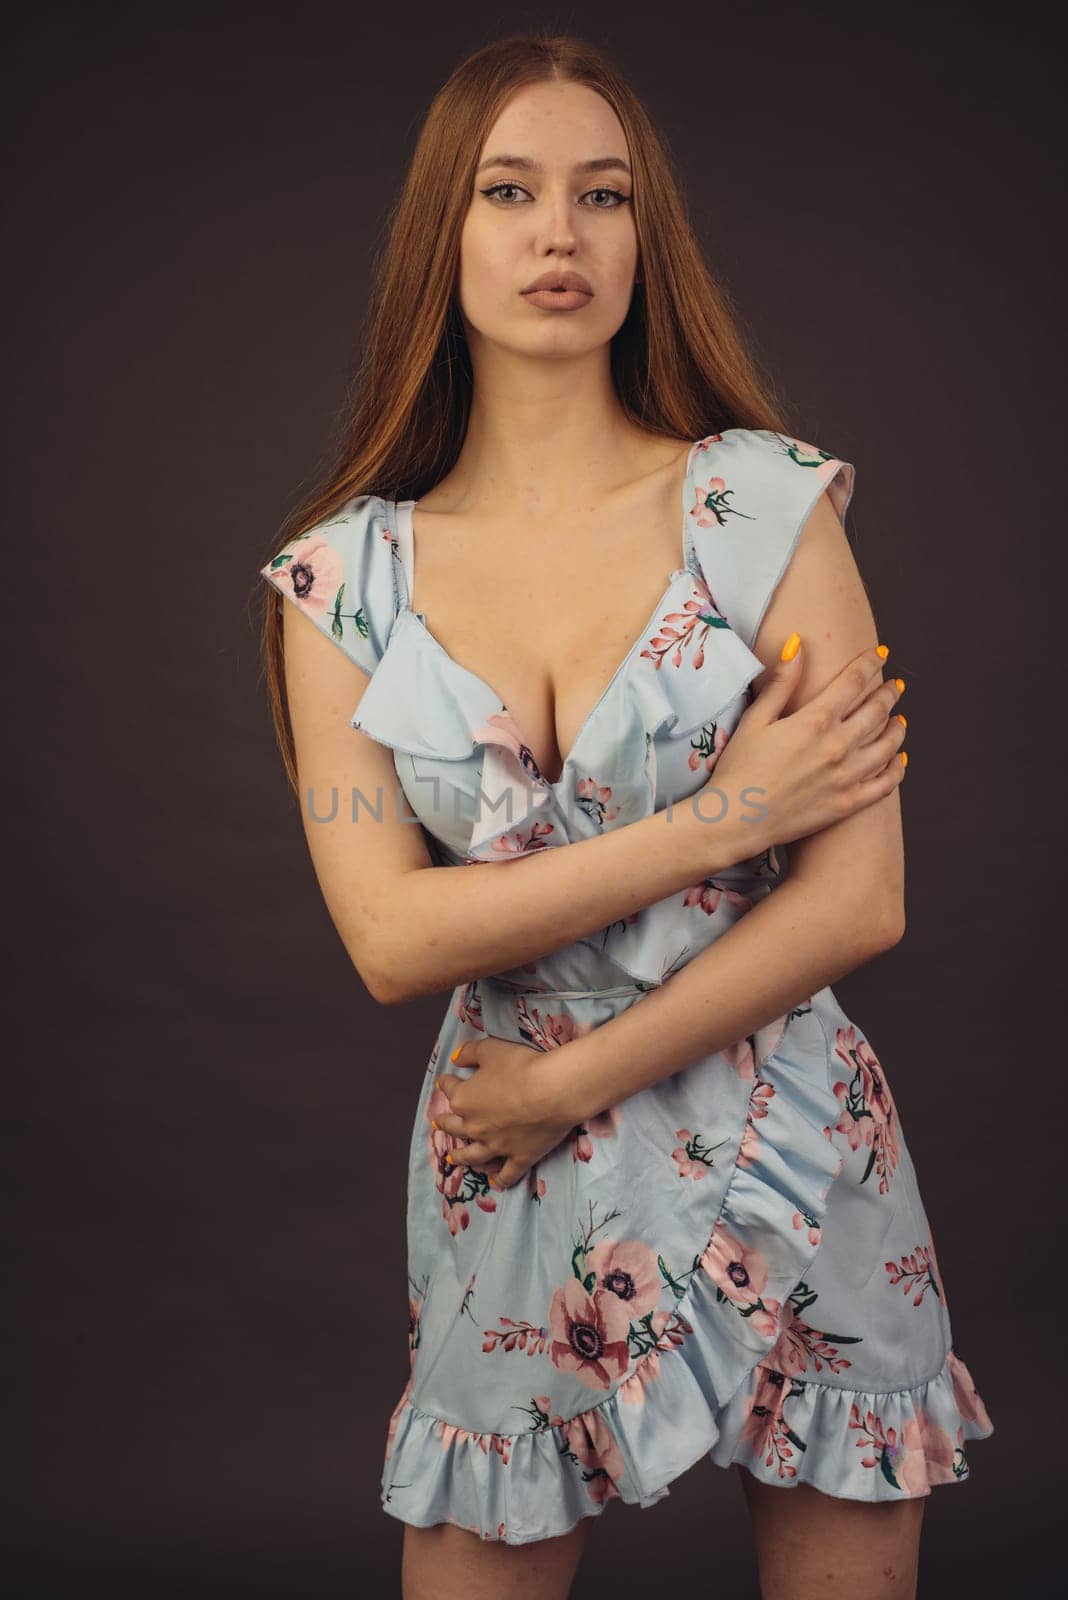 Young attractive woman posing in the studio. A full-lipped girl has problems with skin on her face and body, disease of psoriasis. She does not lose heart and lives a full life wants to become a model